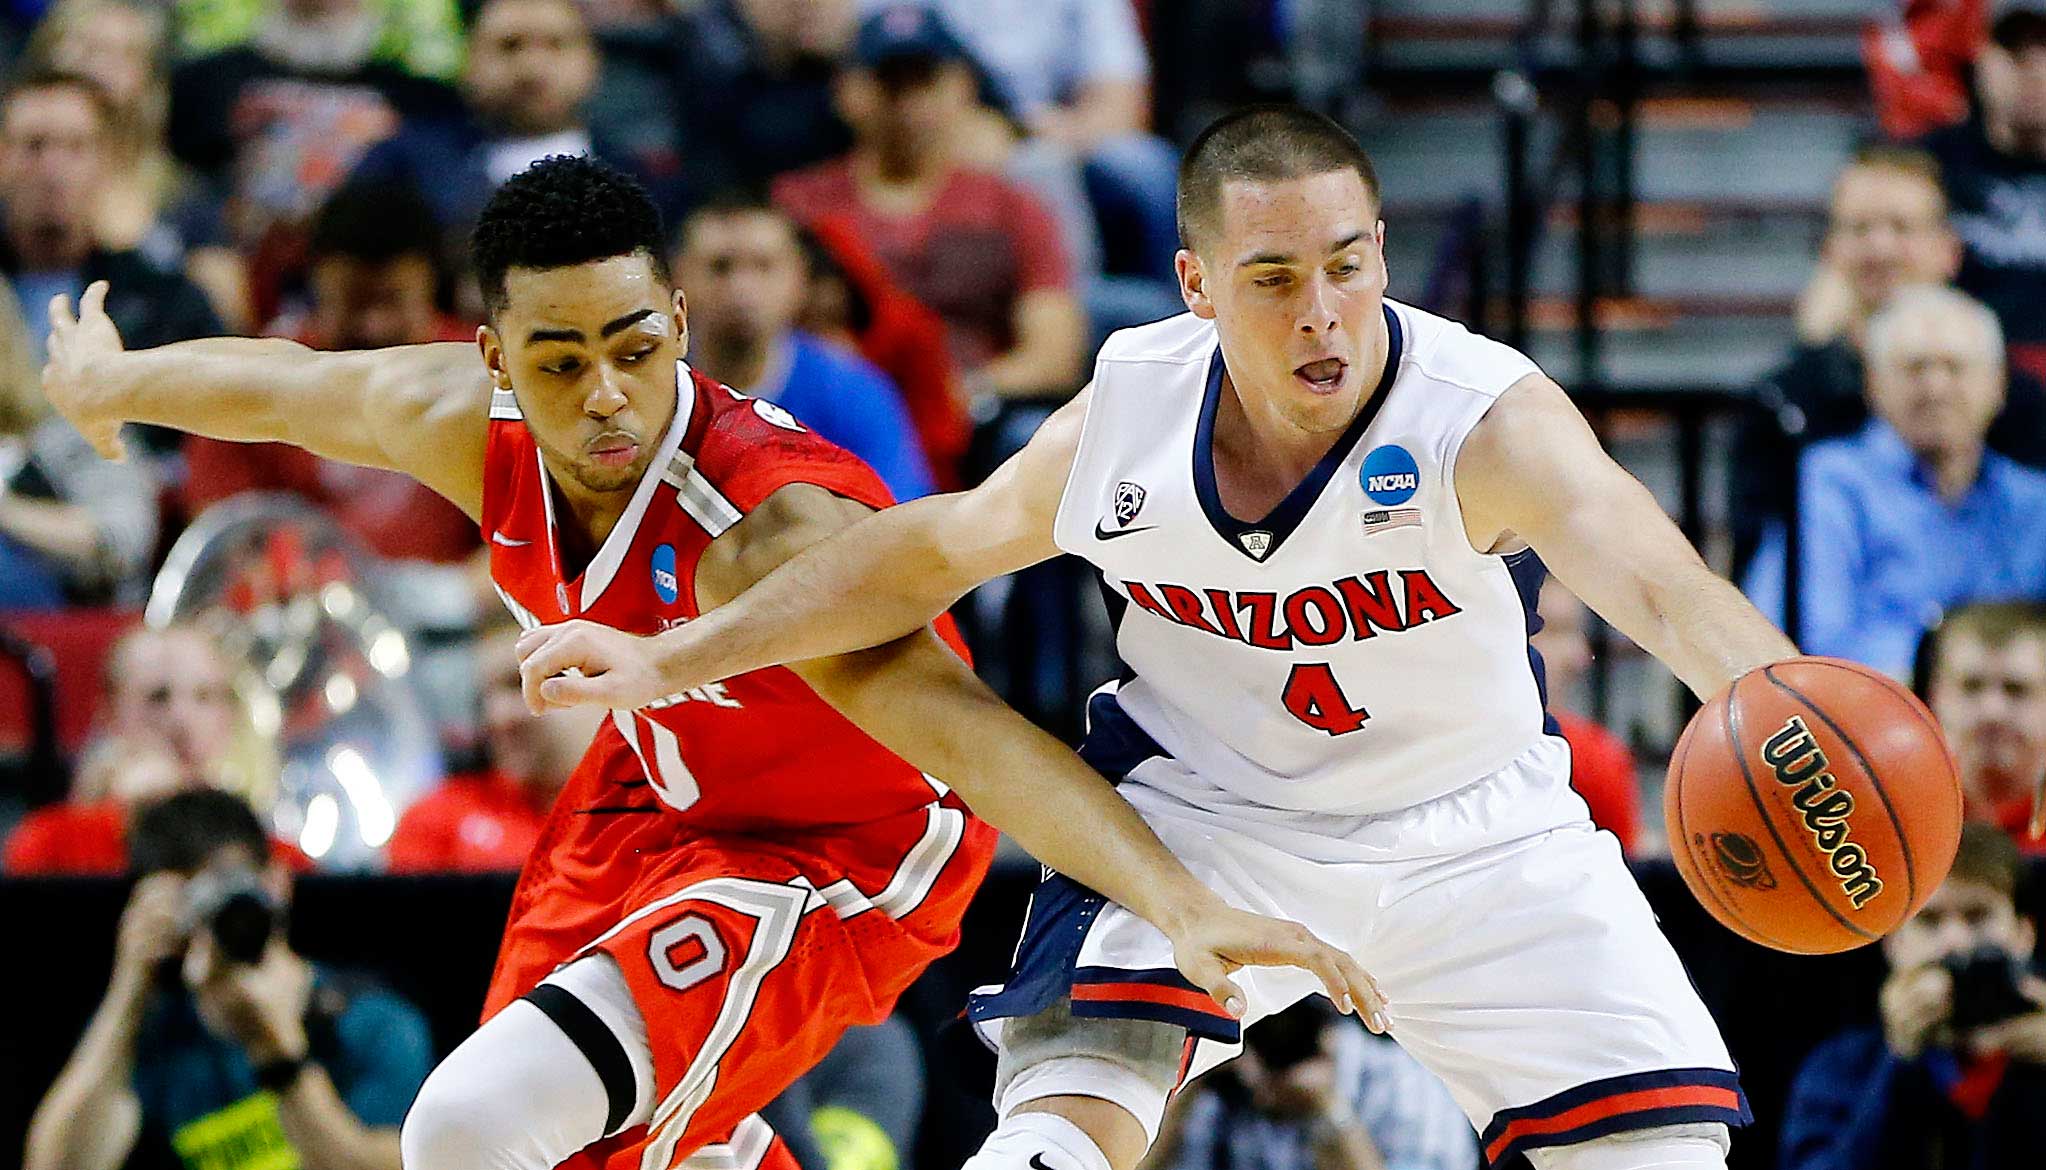 T.J. McConnell of the Arizona Wildcats and D'Angelo Russell of the Ohio State Buckeyes vie for a loose ball in the second half during the third round of the 2015 NCAA Men's Basketball Tournament at Moda Center in Portland, Ore. on March 21, 2015.